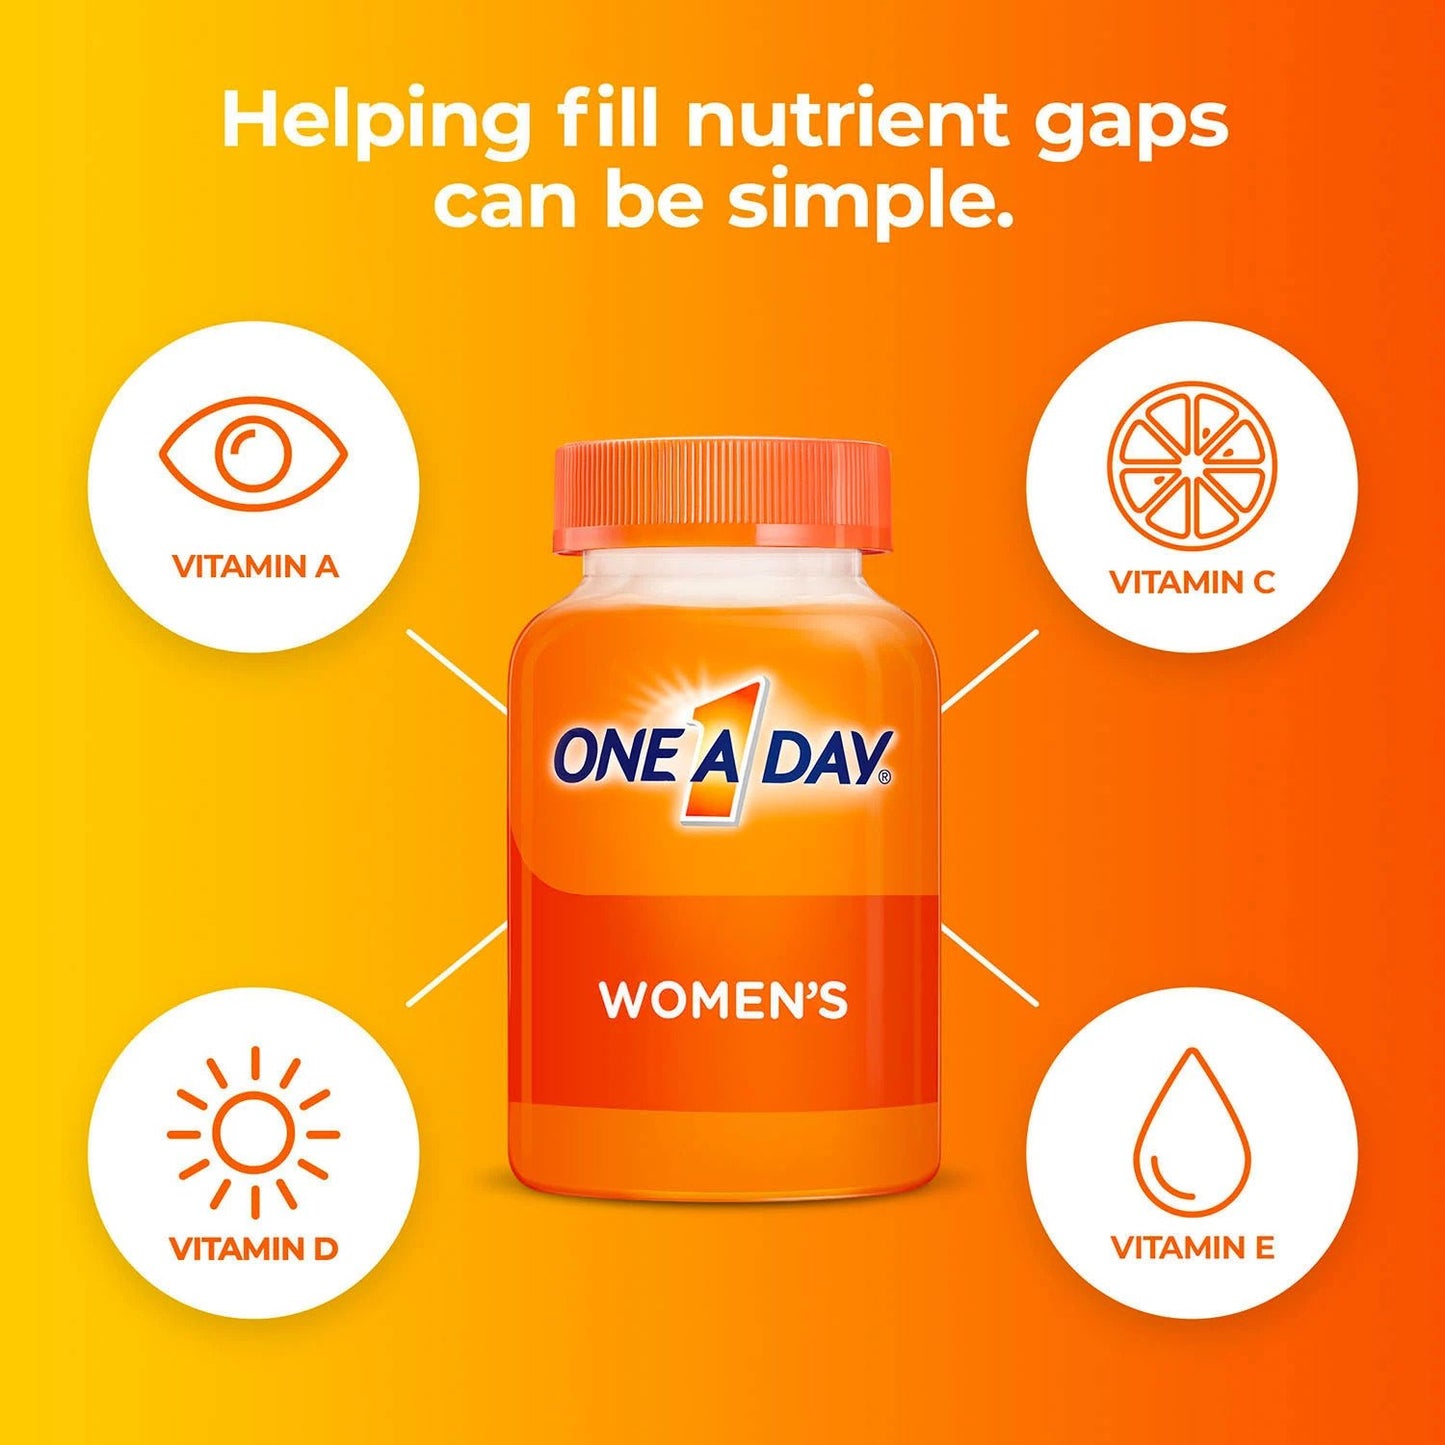 One a Day Women's Multivitamin (300 Tablets)